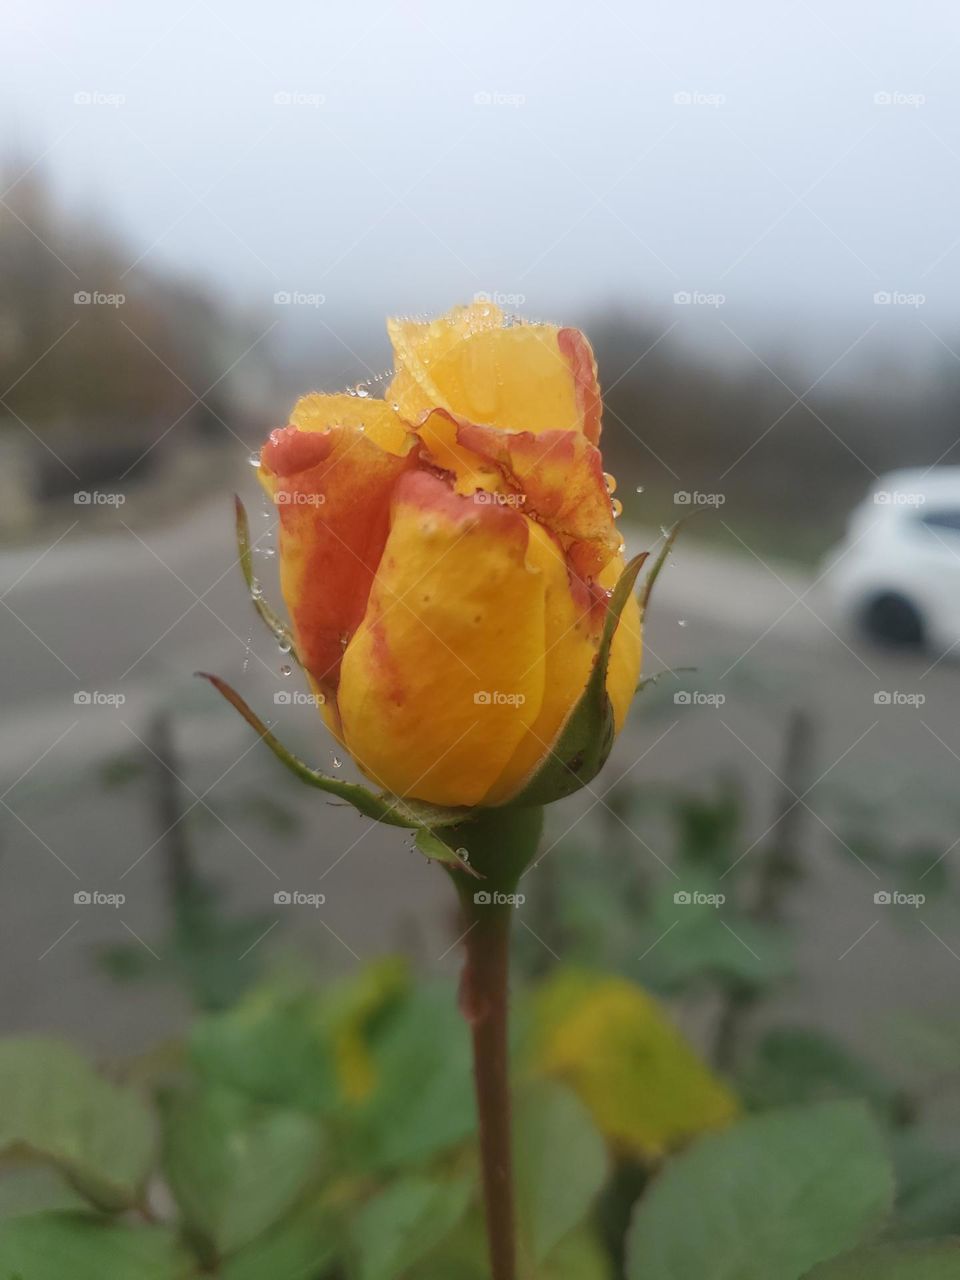 A yellow rose in the morning with small waterdrops